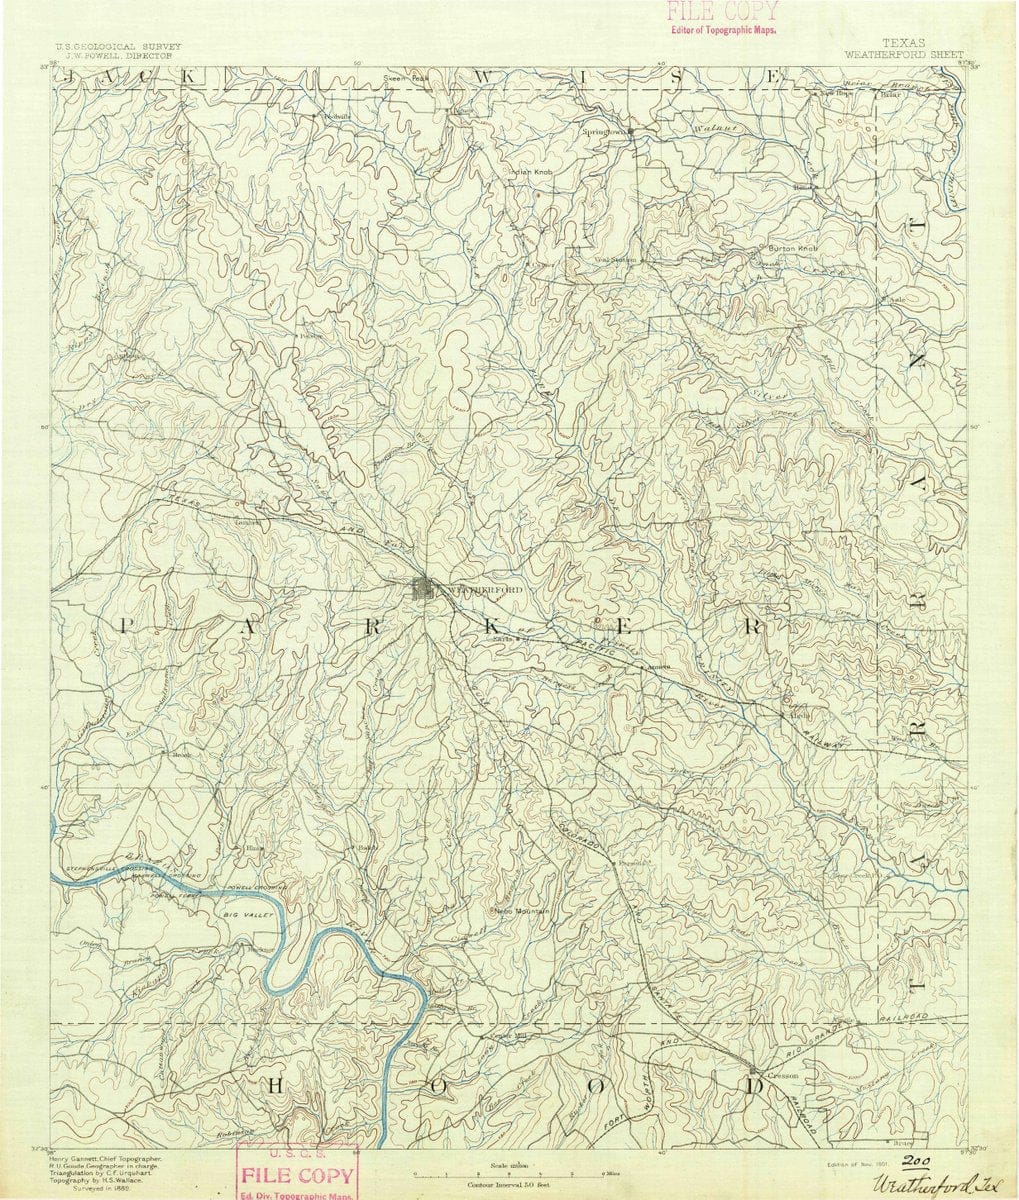 1891 Weatherford, TX  - Texas - USGS Topographic Map